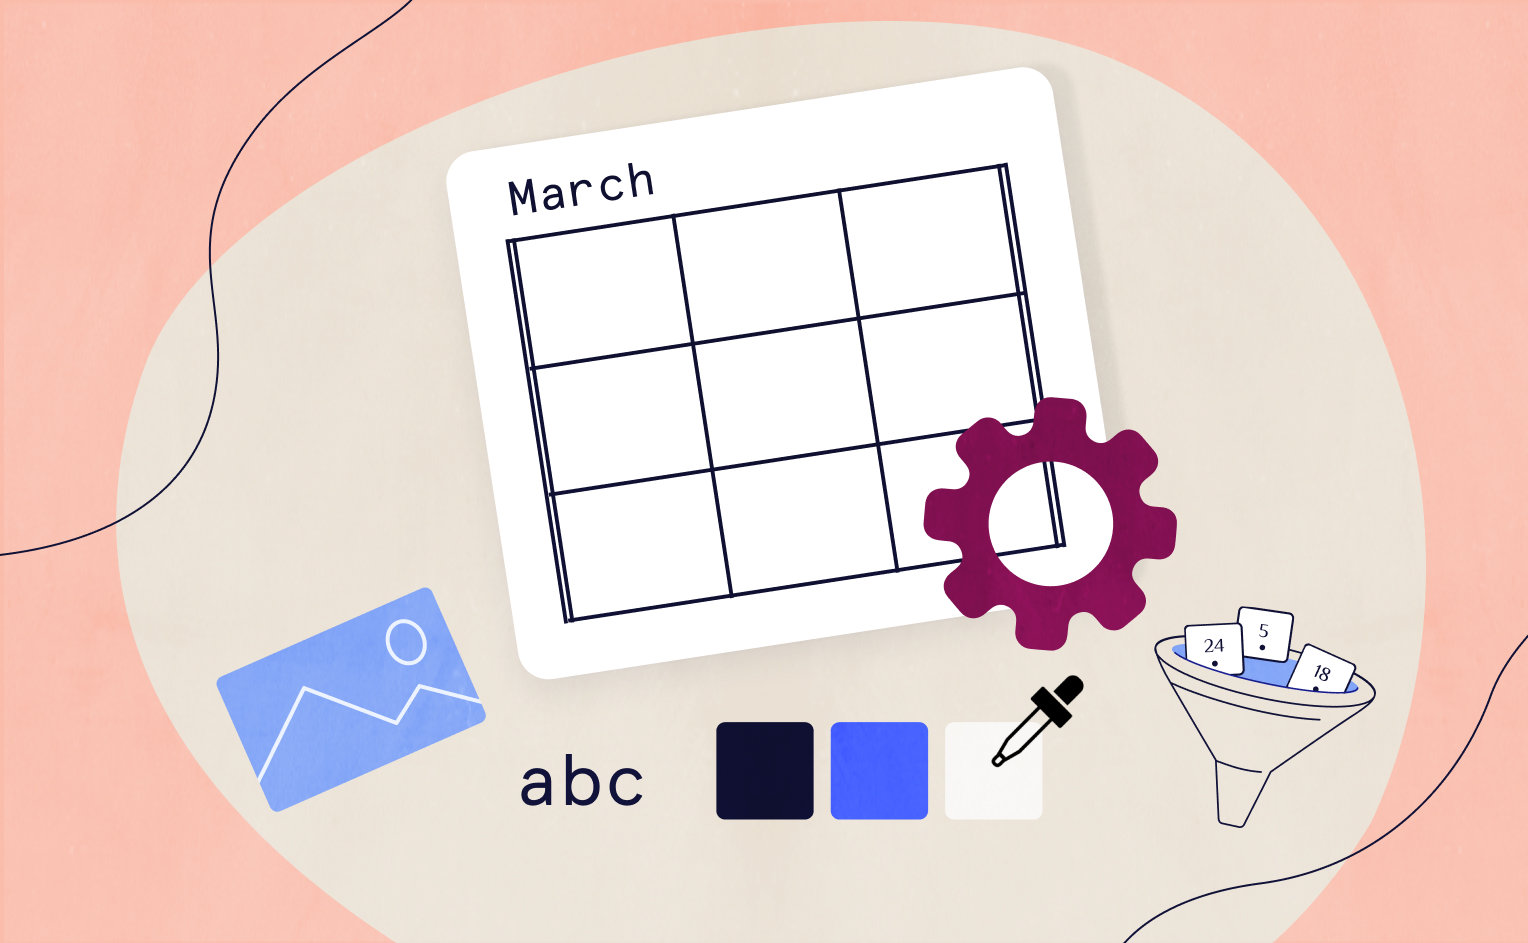 graphic showing customization setting icons for filtering, fonts, colors, and images with a calendar